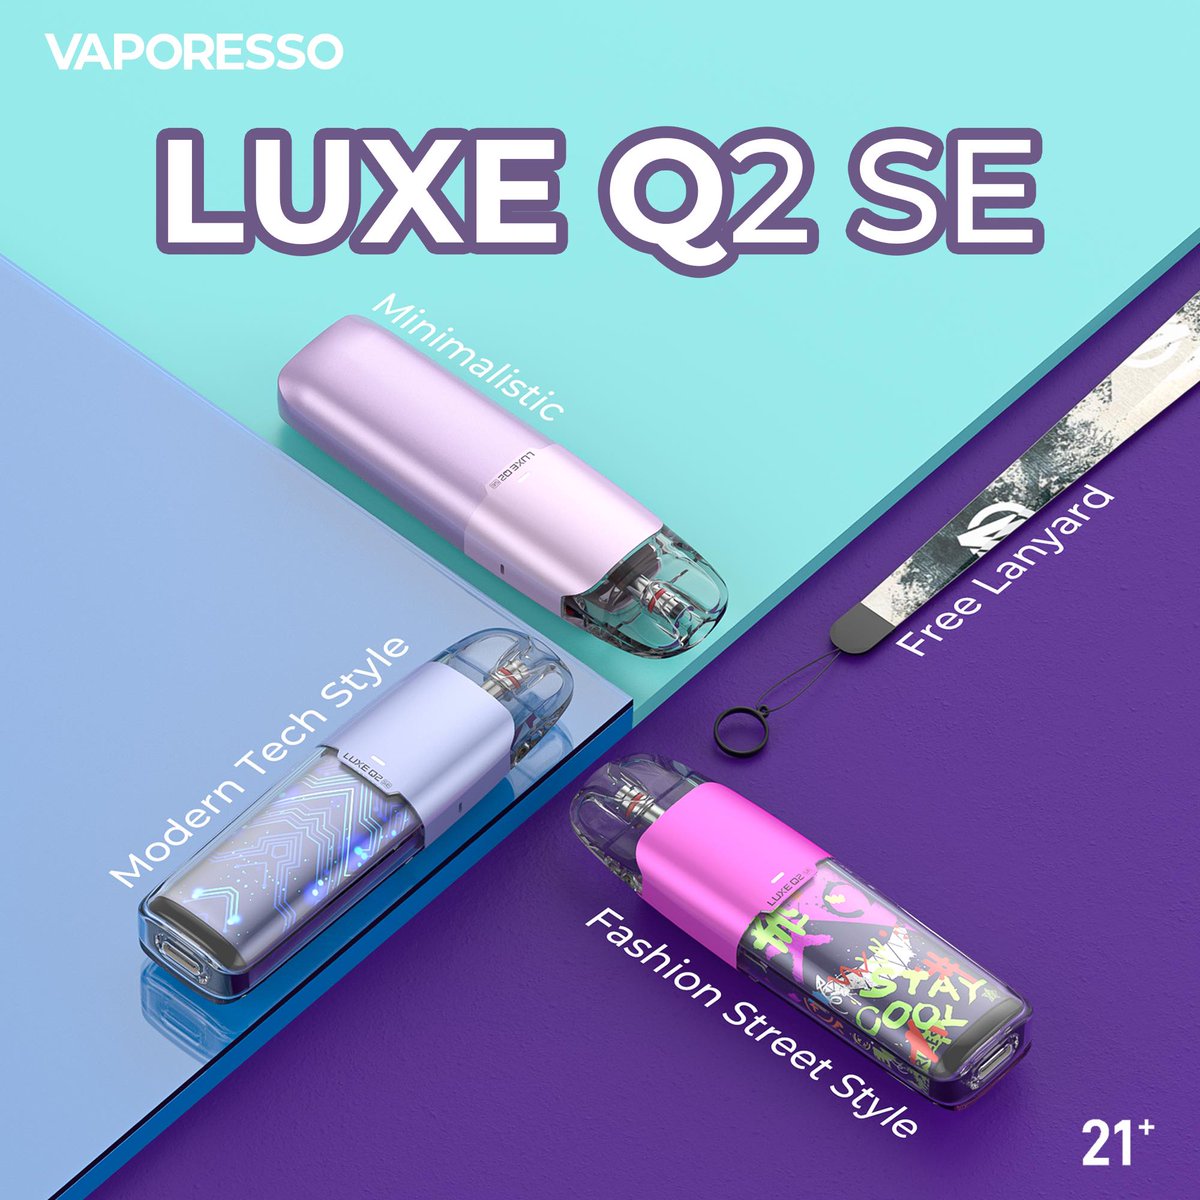 VAPORESSO LUXE Q2 SE😍✨In stock!
Minimalistic, modern, and fashionable – it's the epitome of style and sophistication.

🛒🛒🛒bit.ly/3YUHITY
Vaping is for adults only.🚭
#Luxeq2
#luxeq2se
#vaporessoluxe
#NewArrival
#vaporesso
#VapeTechnology 
#vape
#vapelife
#vapedaily